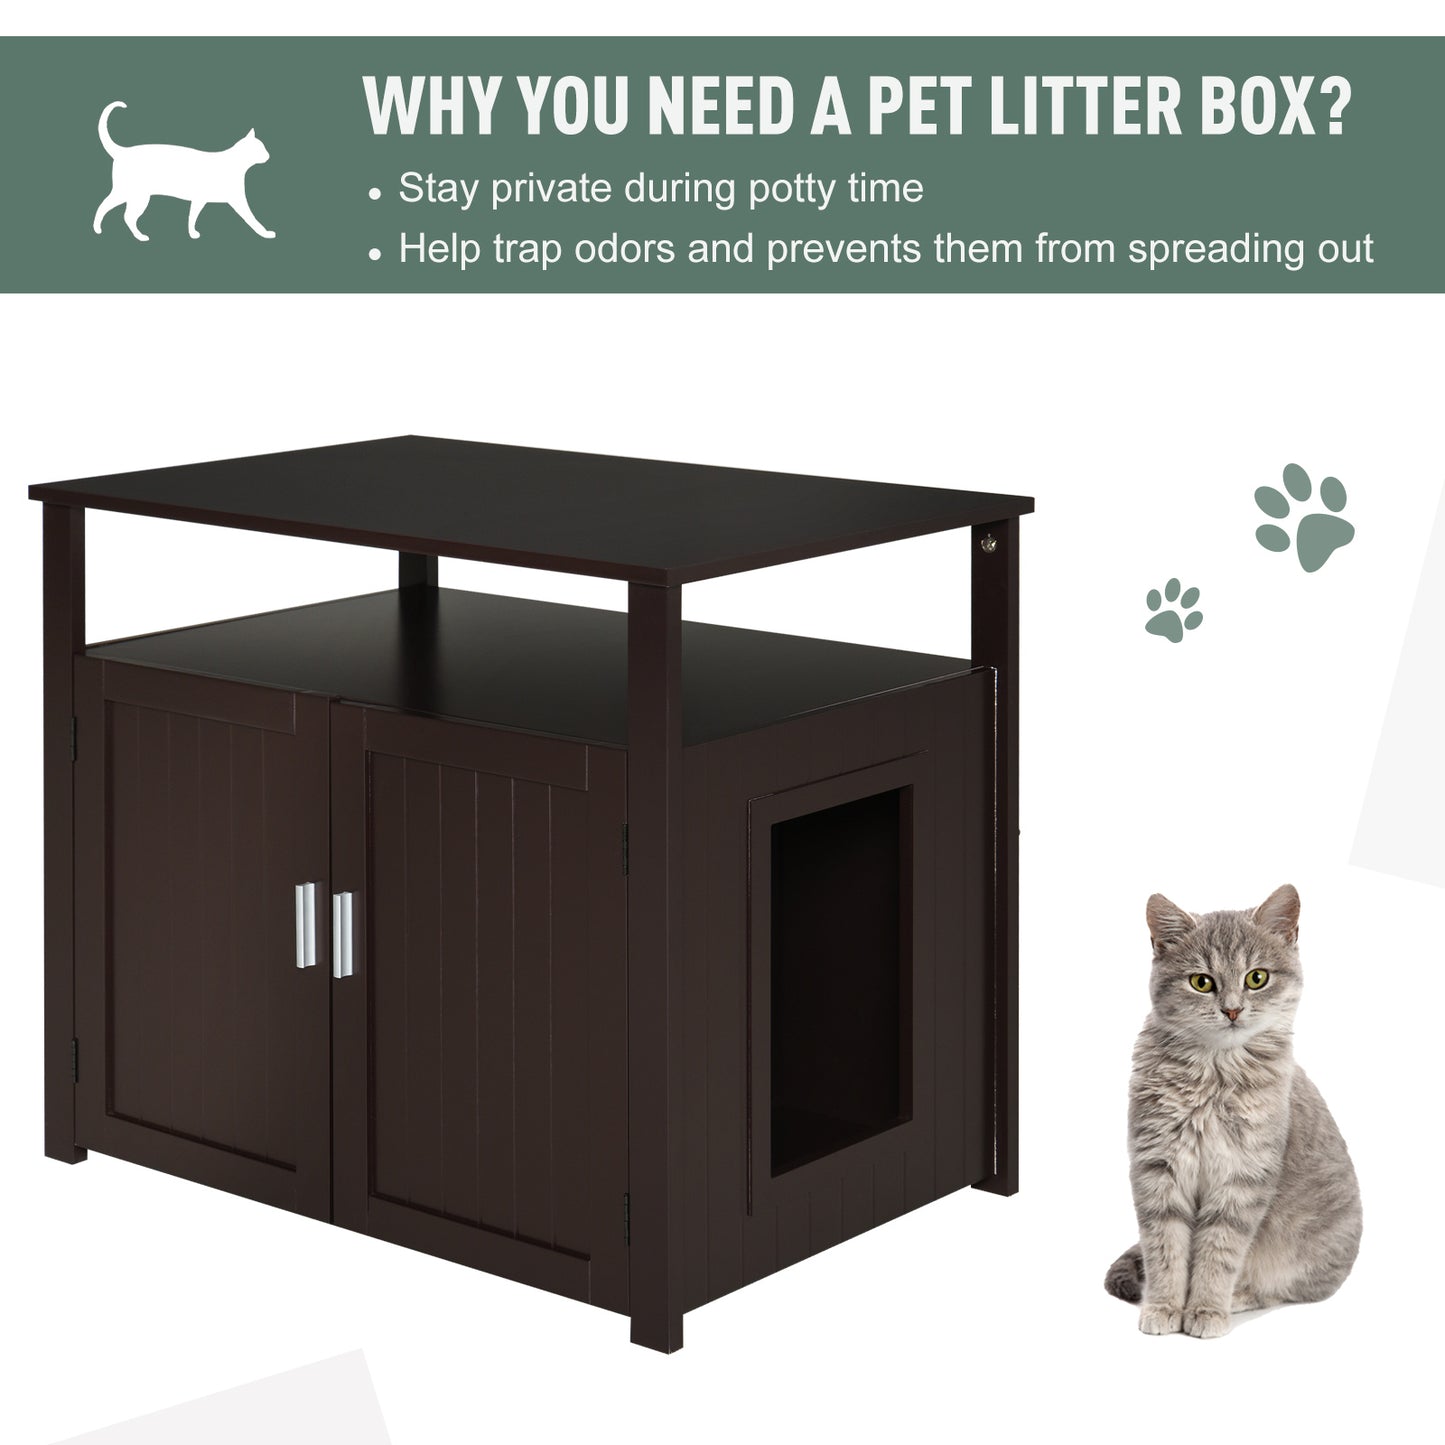 Pawhut Wooden Cat Litter Box Enclosure Furniture with Adjustable Interior Wall & Large Tabletop for Nightstand, Brown